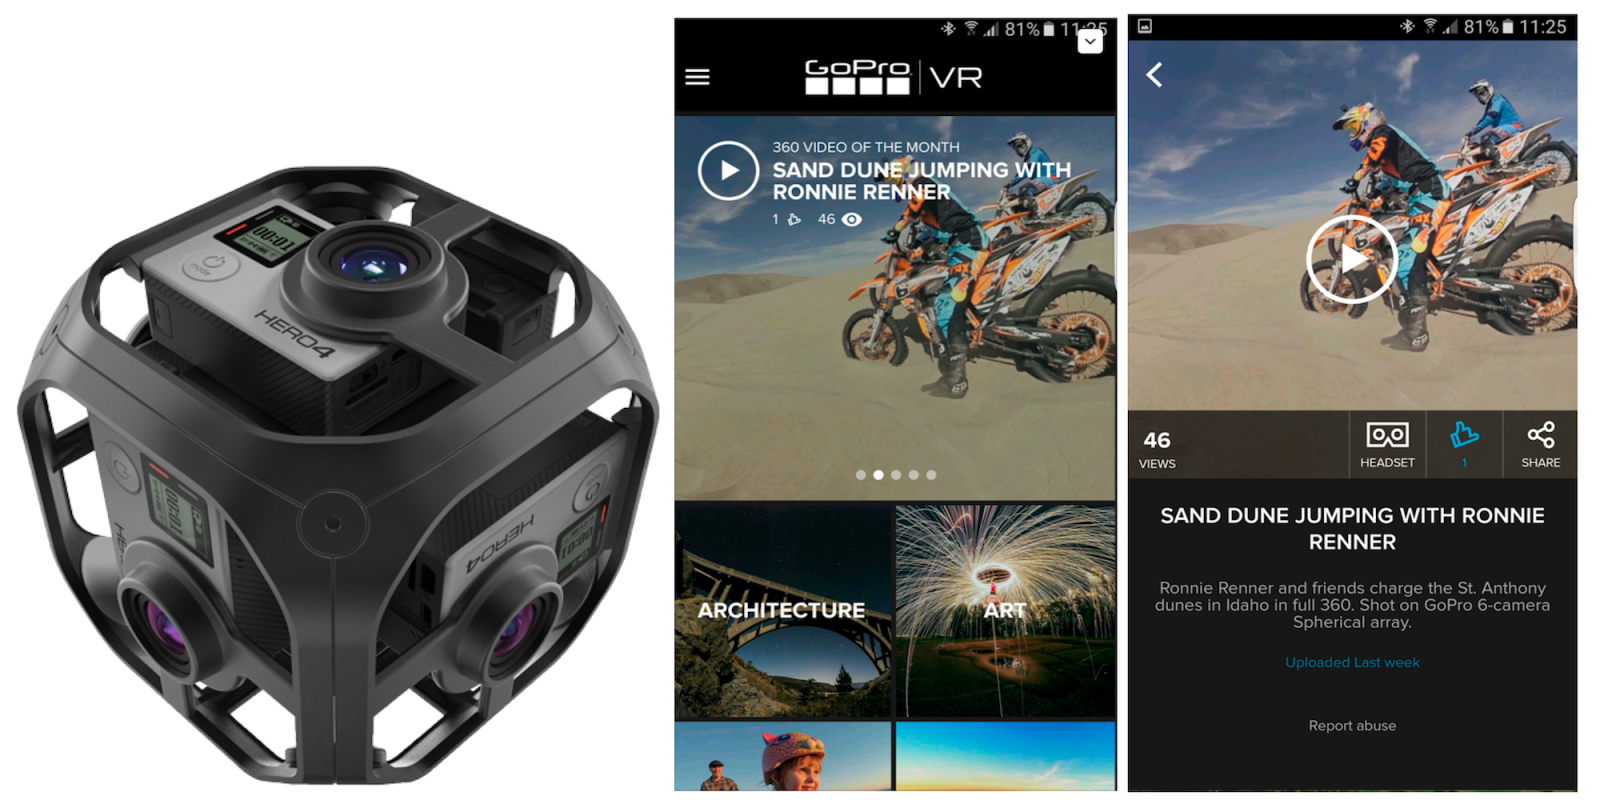 Gopro Vr Mobile App Launches For 360 Degree Virtual Reality Content Alongside New Camera Rigs 9to5google